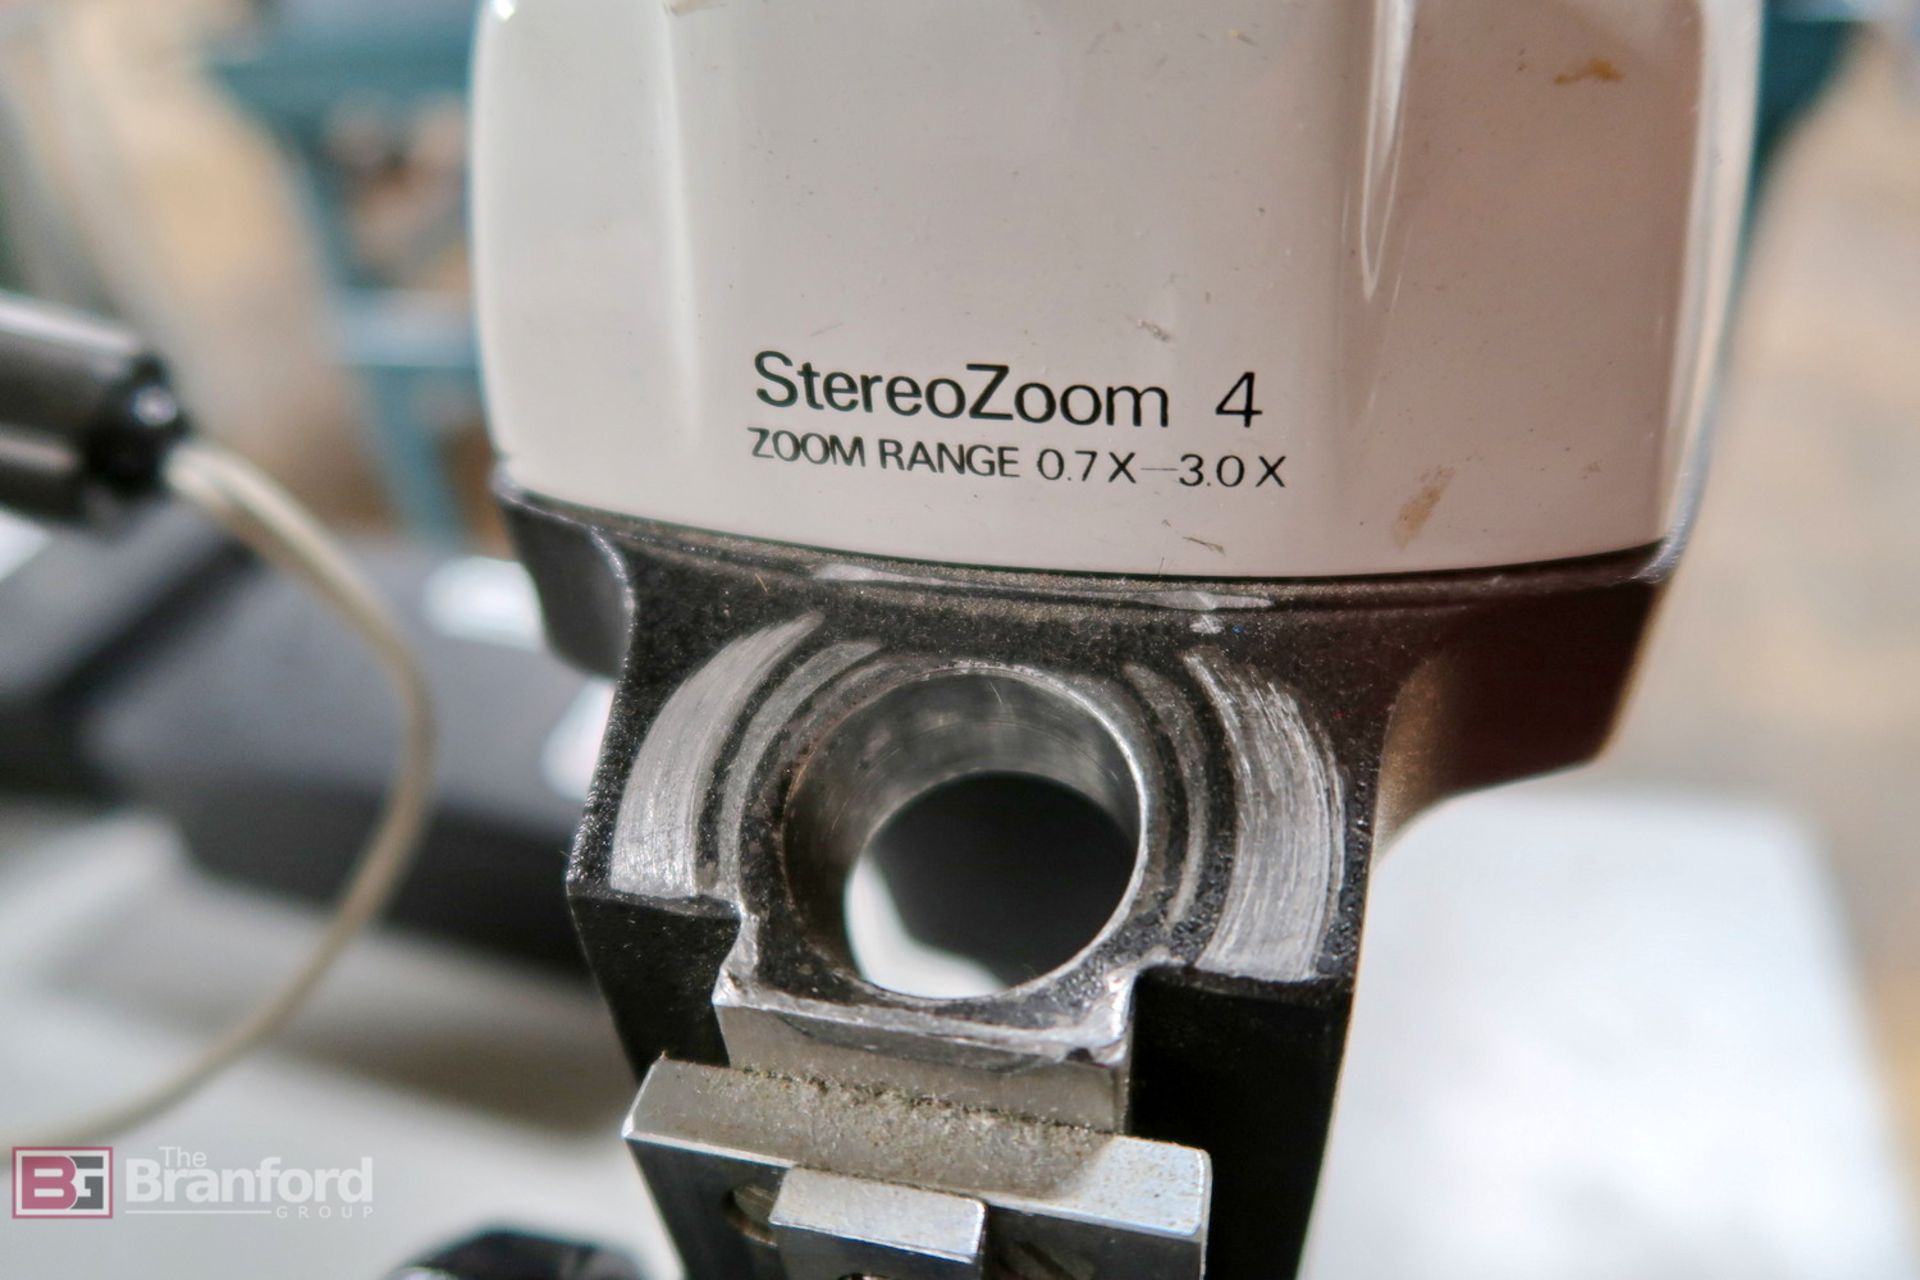 Bausch & Lomb Sterozoom 4 microscope - Image 3 of 4